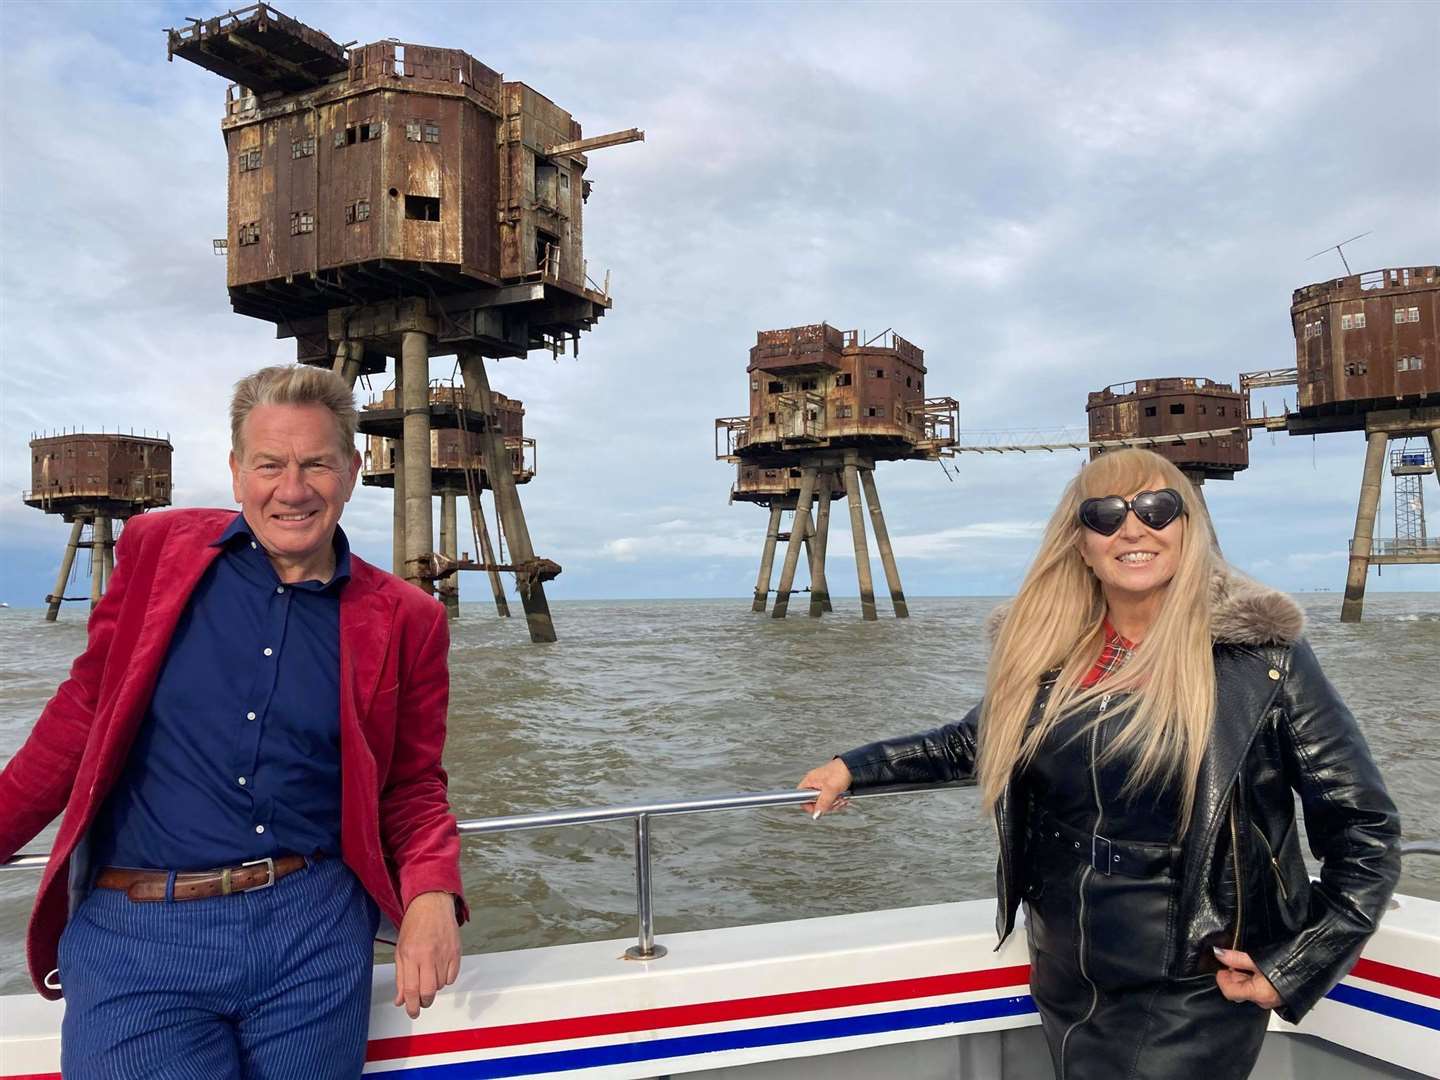 Margaret Flo McEwan took Michael Portillo to see the Second World War sea forts for his TV show